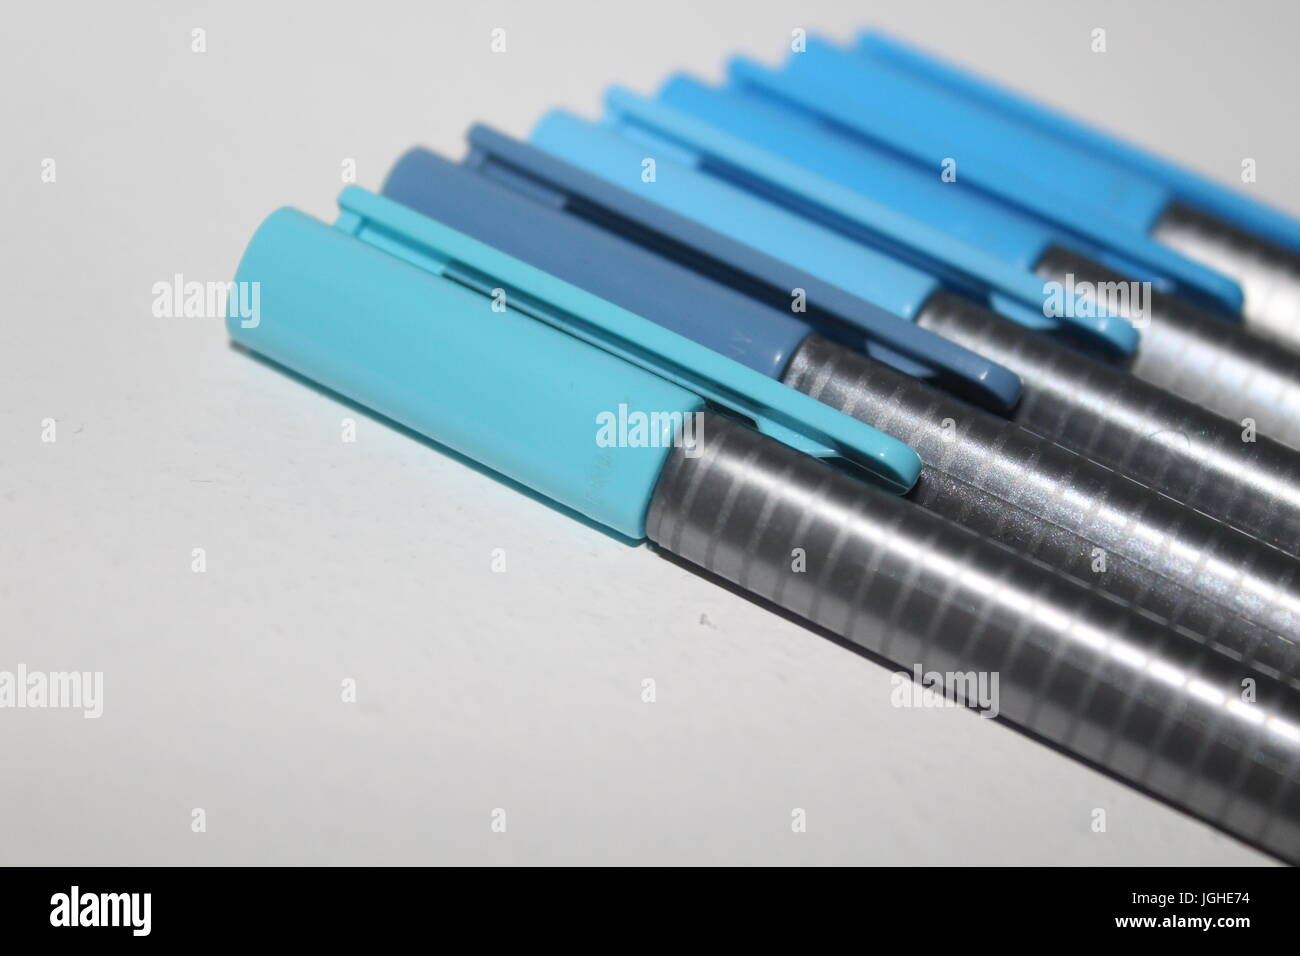 A row of pens in different shades of blue Stock Photo